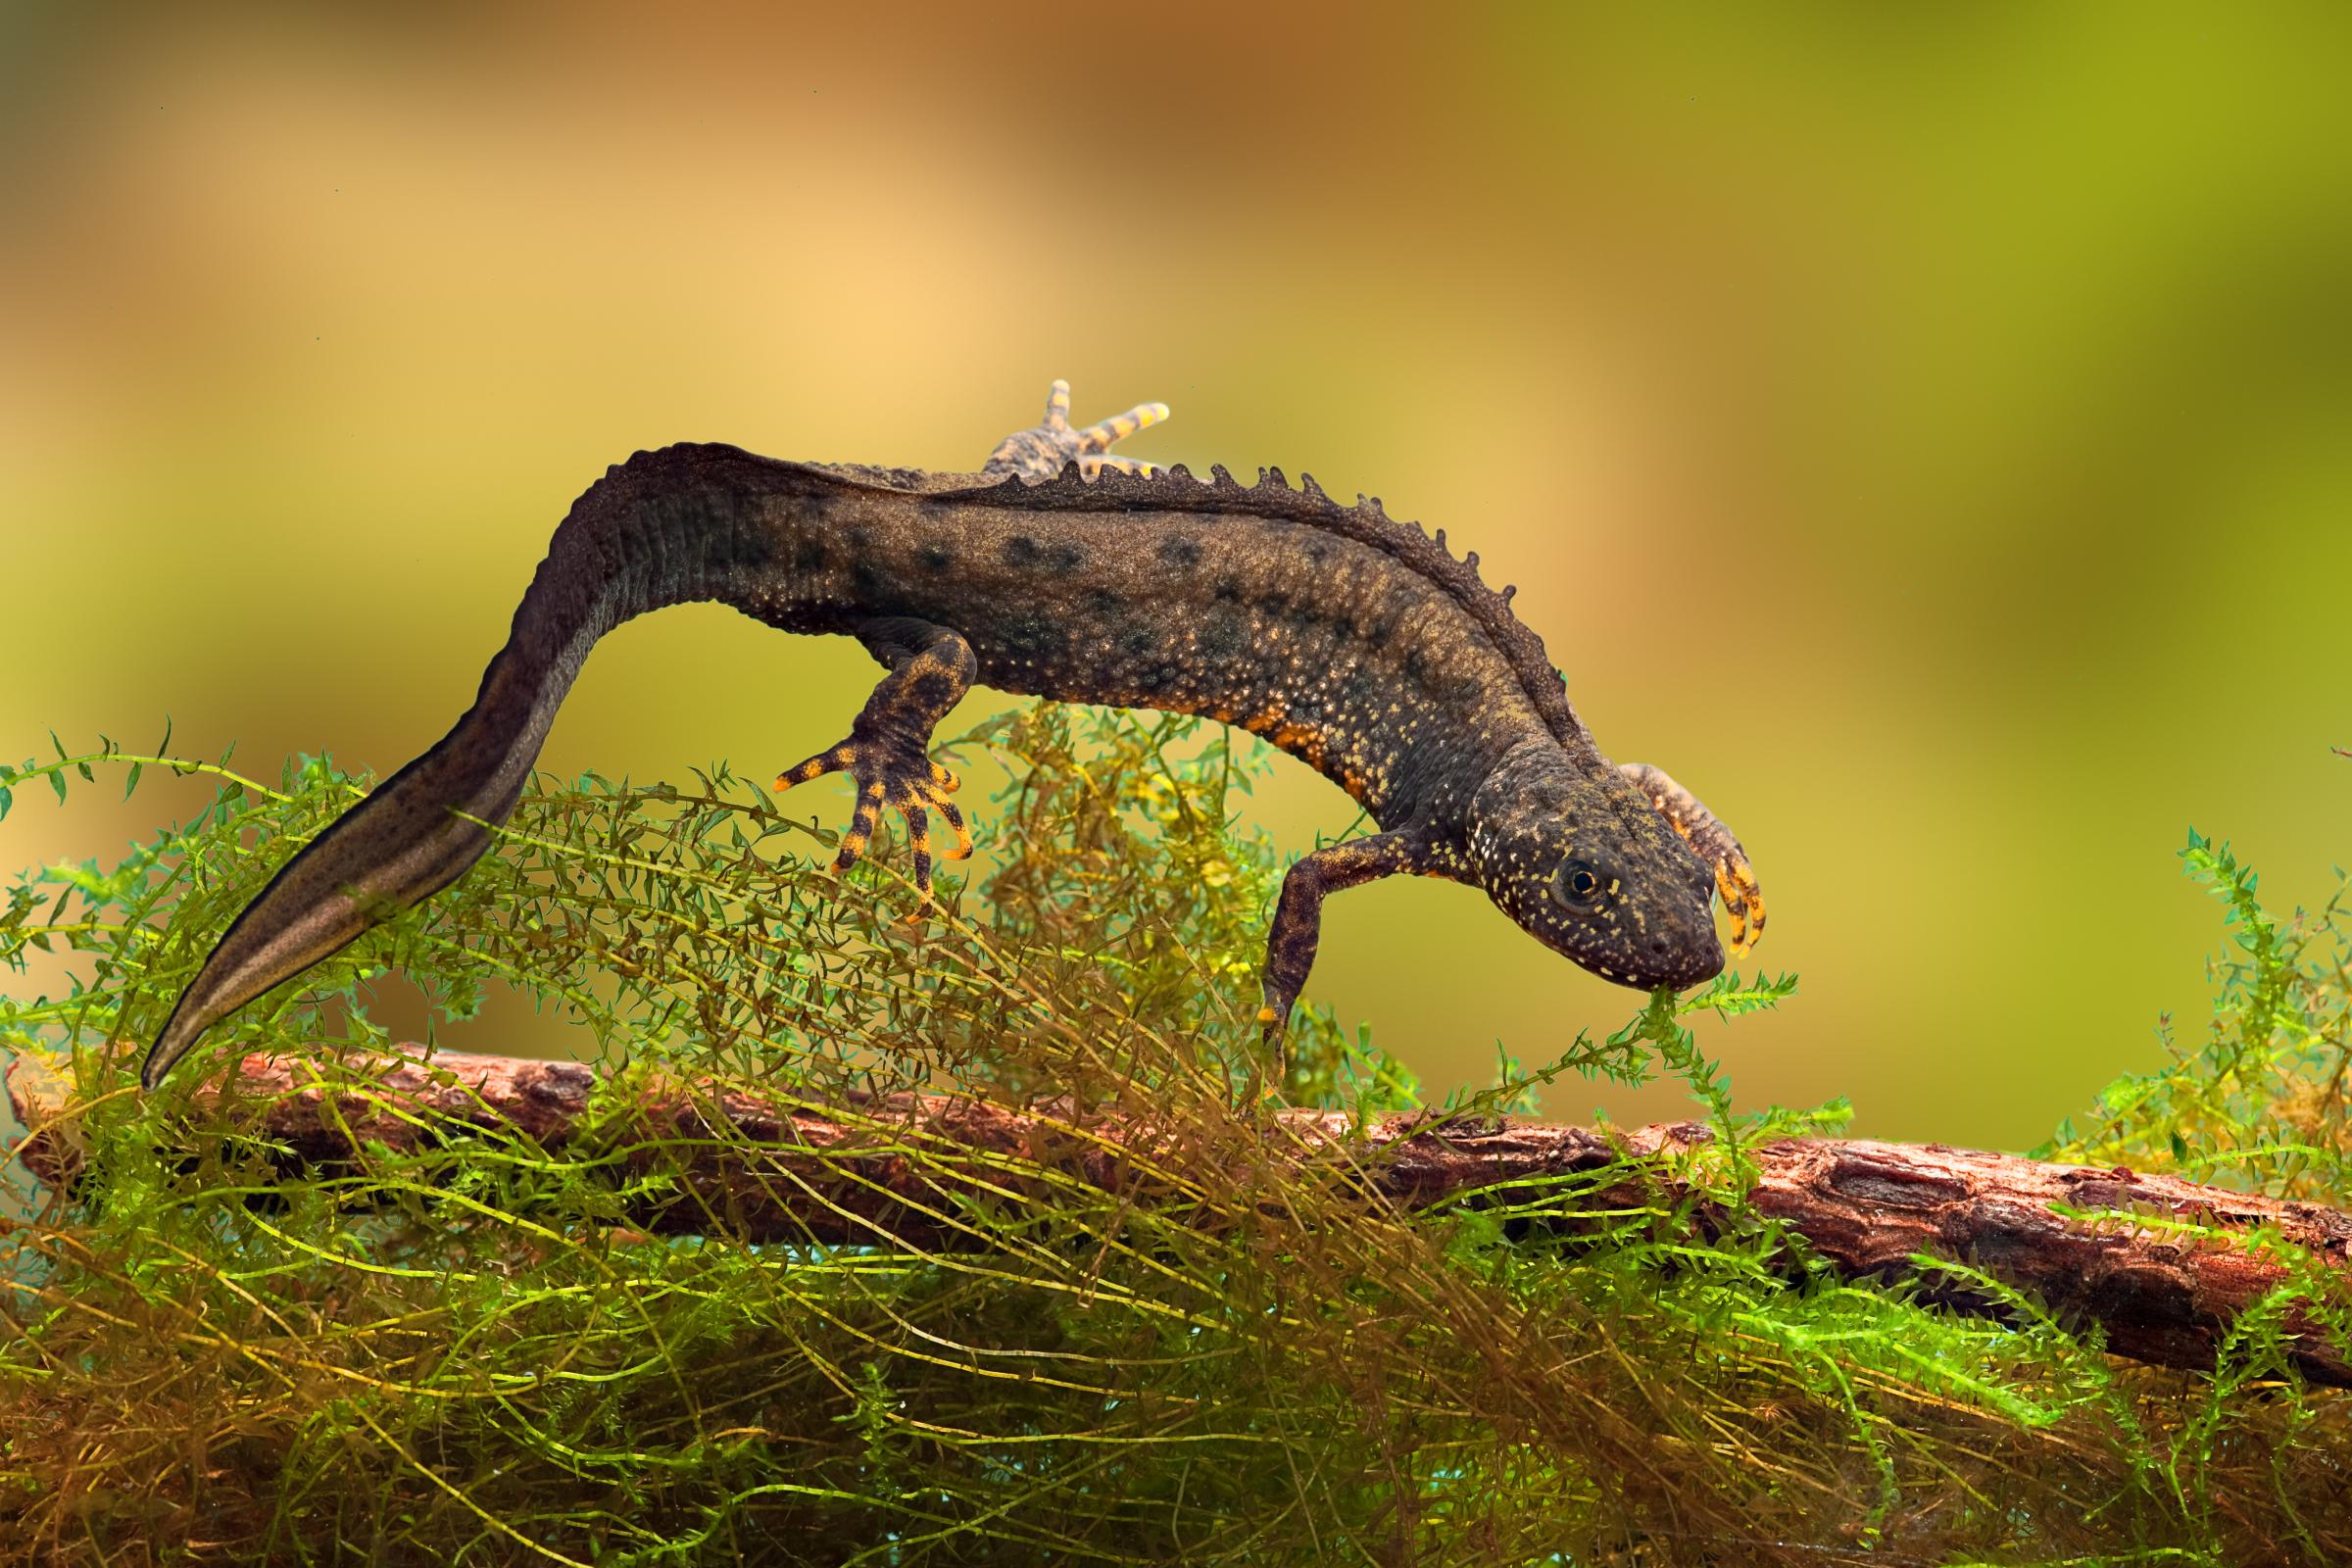 Great crested newt.